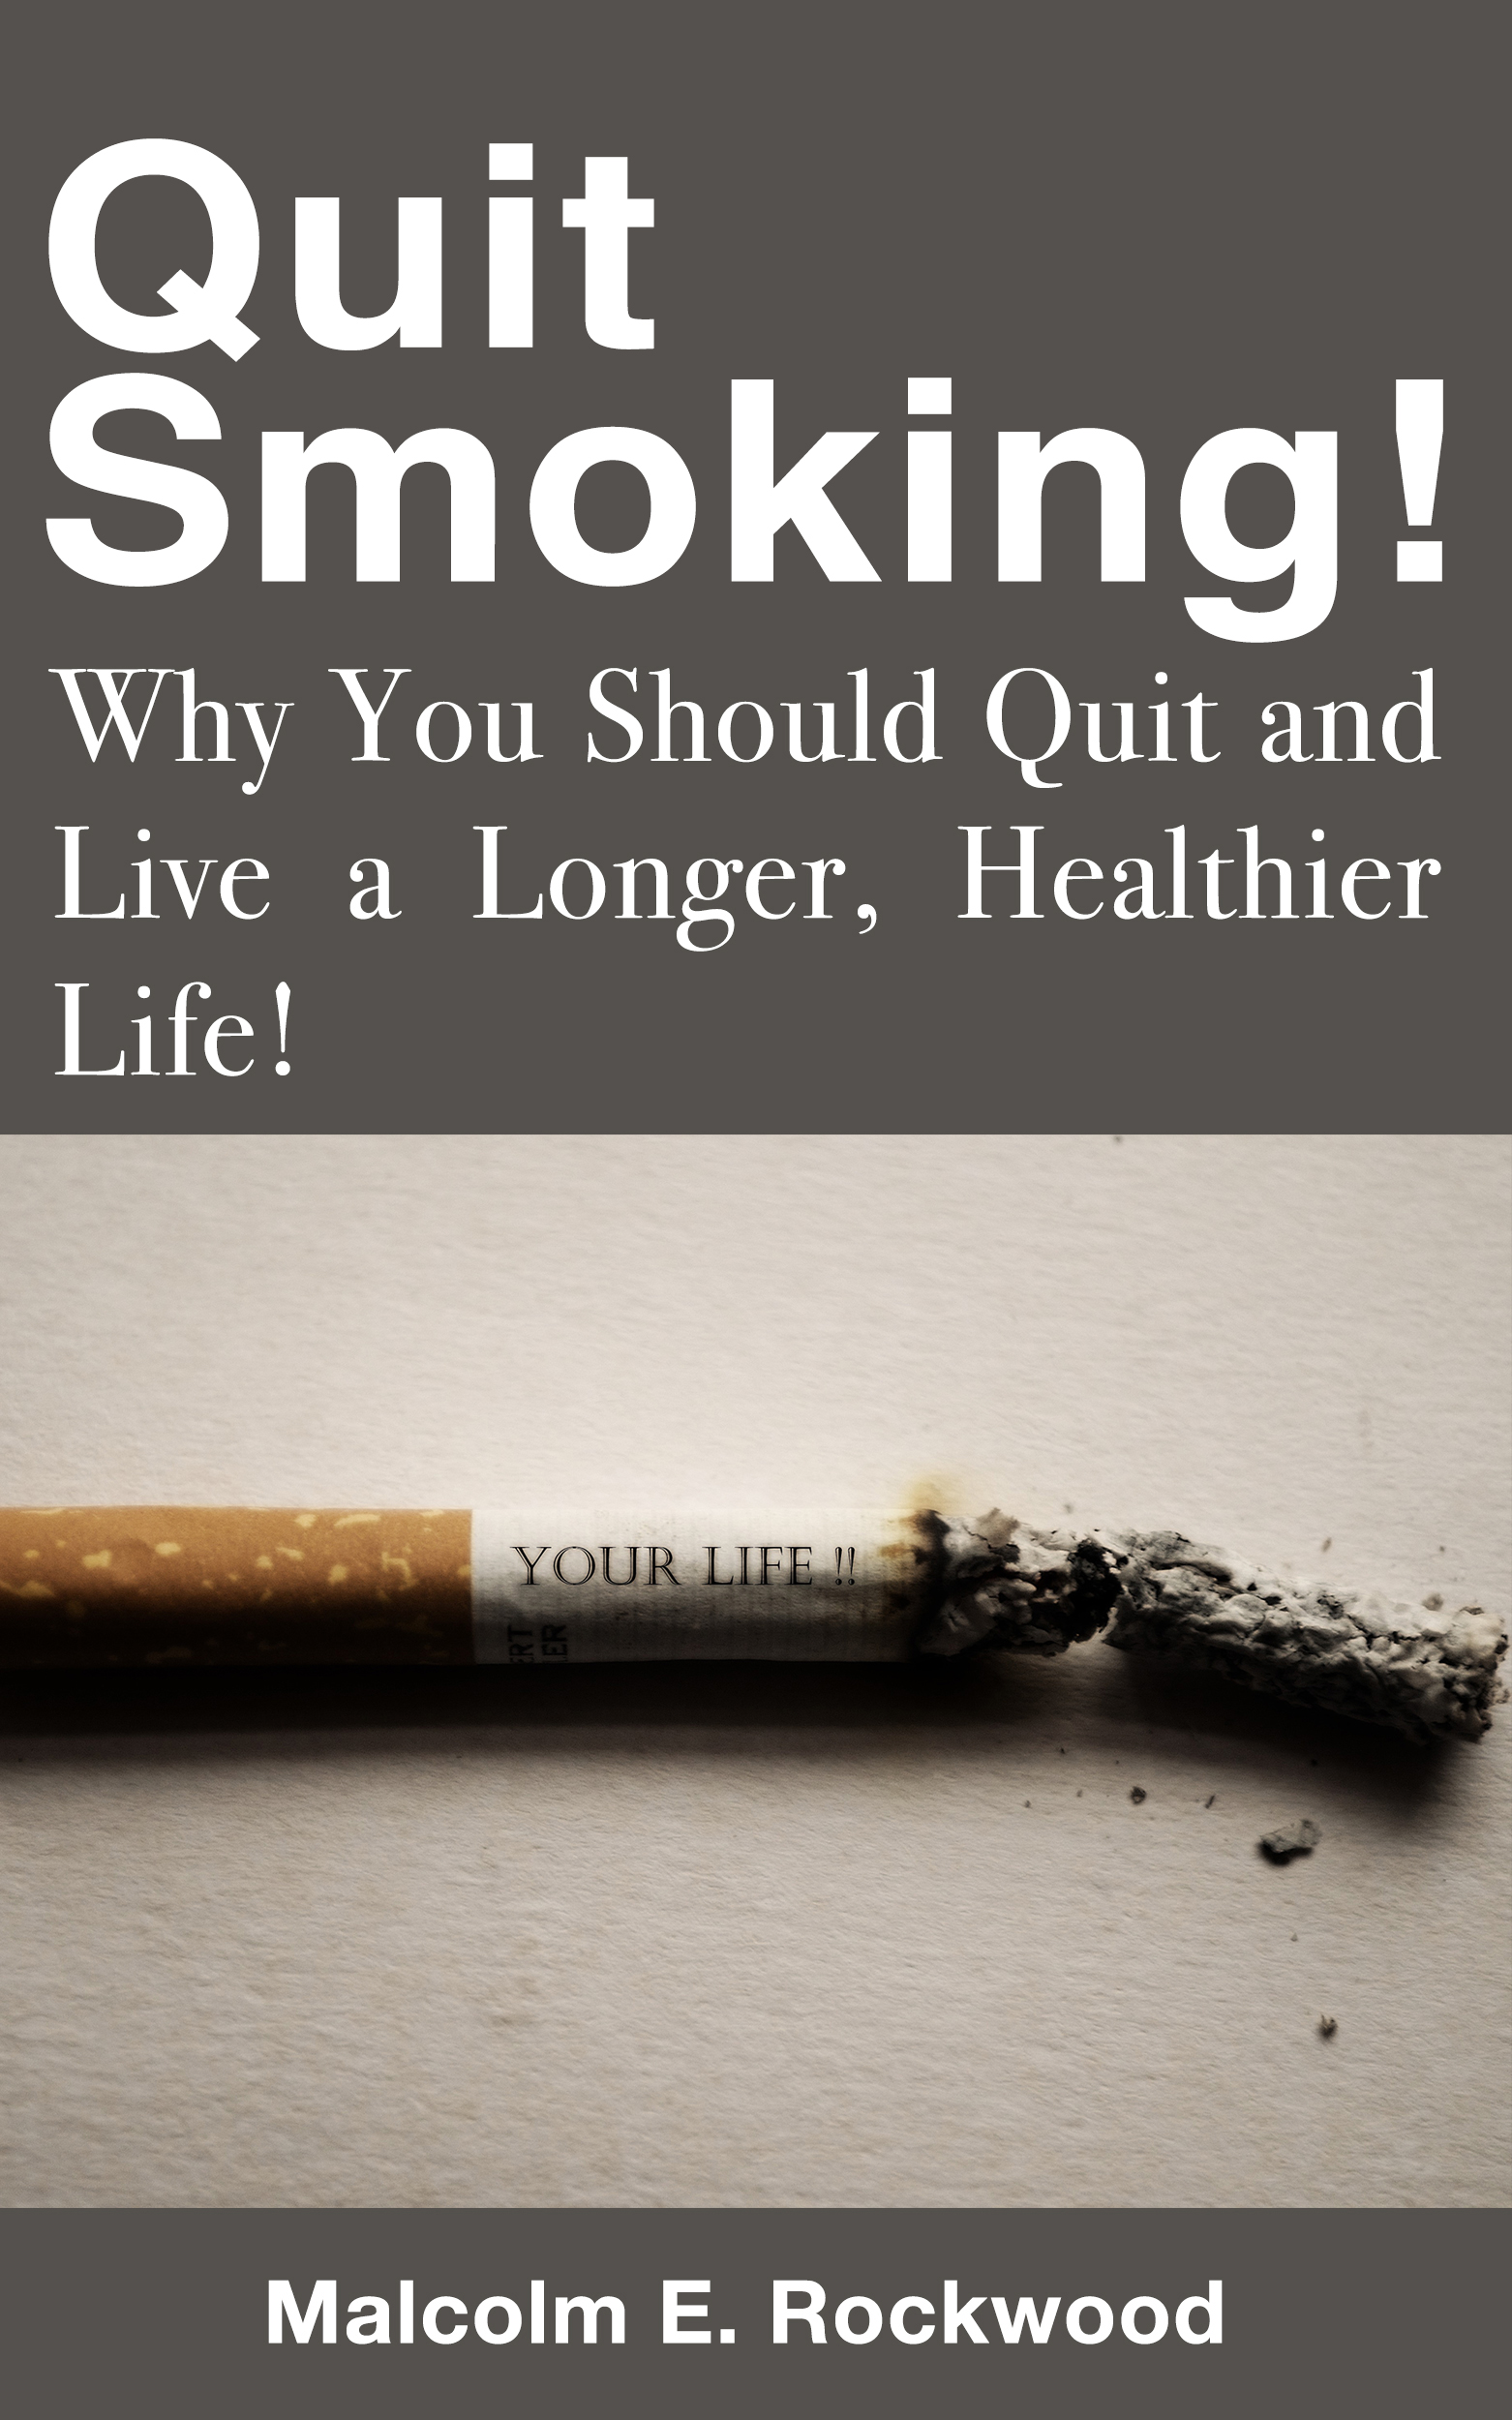 FREE: Quit Smoking! Why You Should Quit and Live a Longer, Healthier Life by Malcolm Rockwood